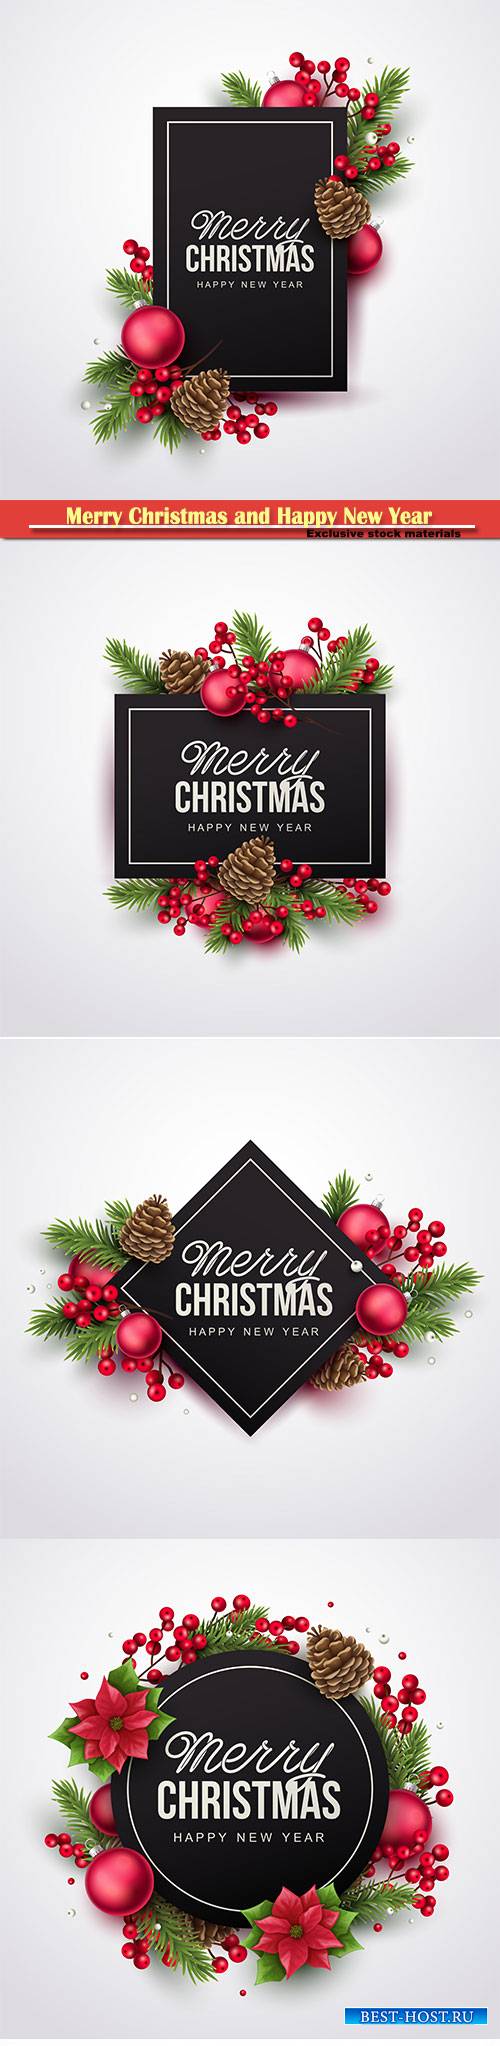 Merry Christmas and Happy New Year greeting vector illustration